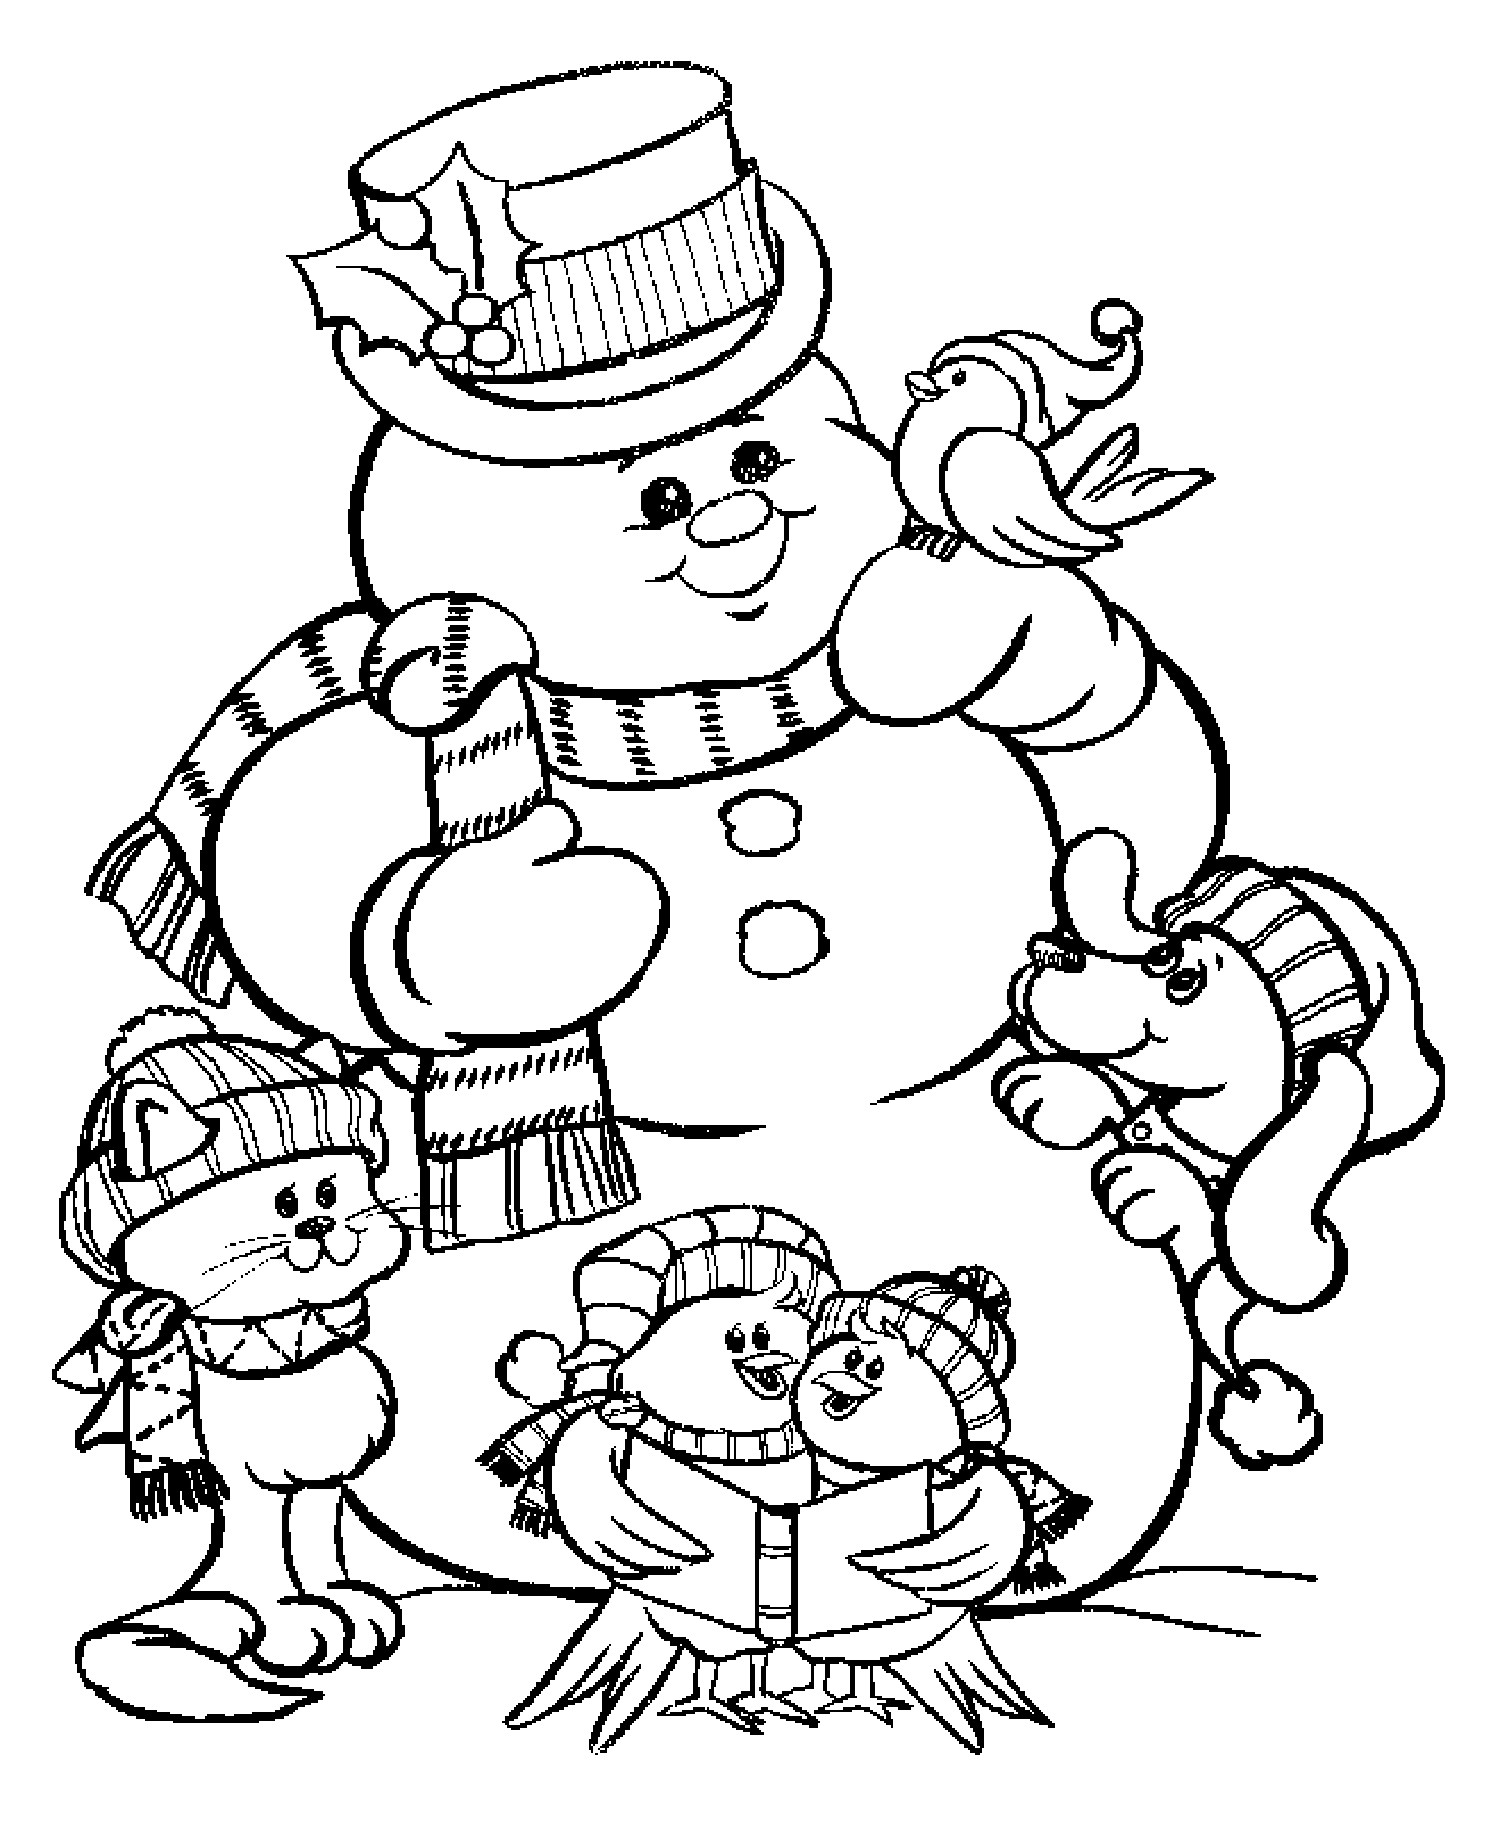 Kids Christmas Coloring Book
 Snowman Christmas Coloring pages for kids to print & color